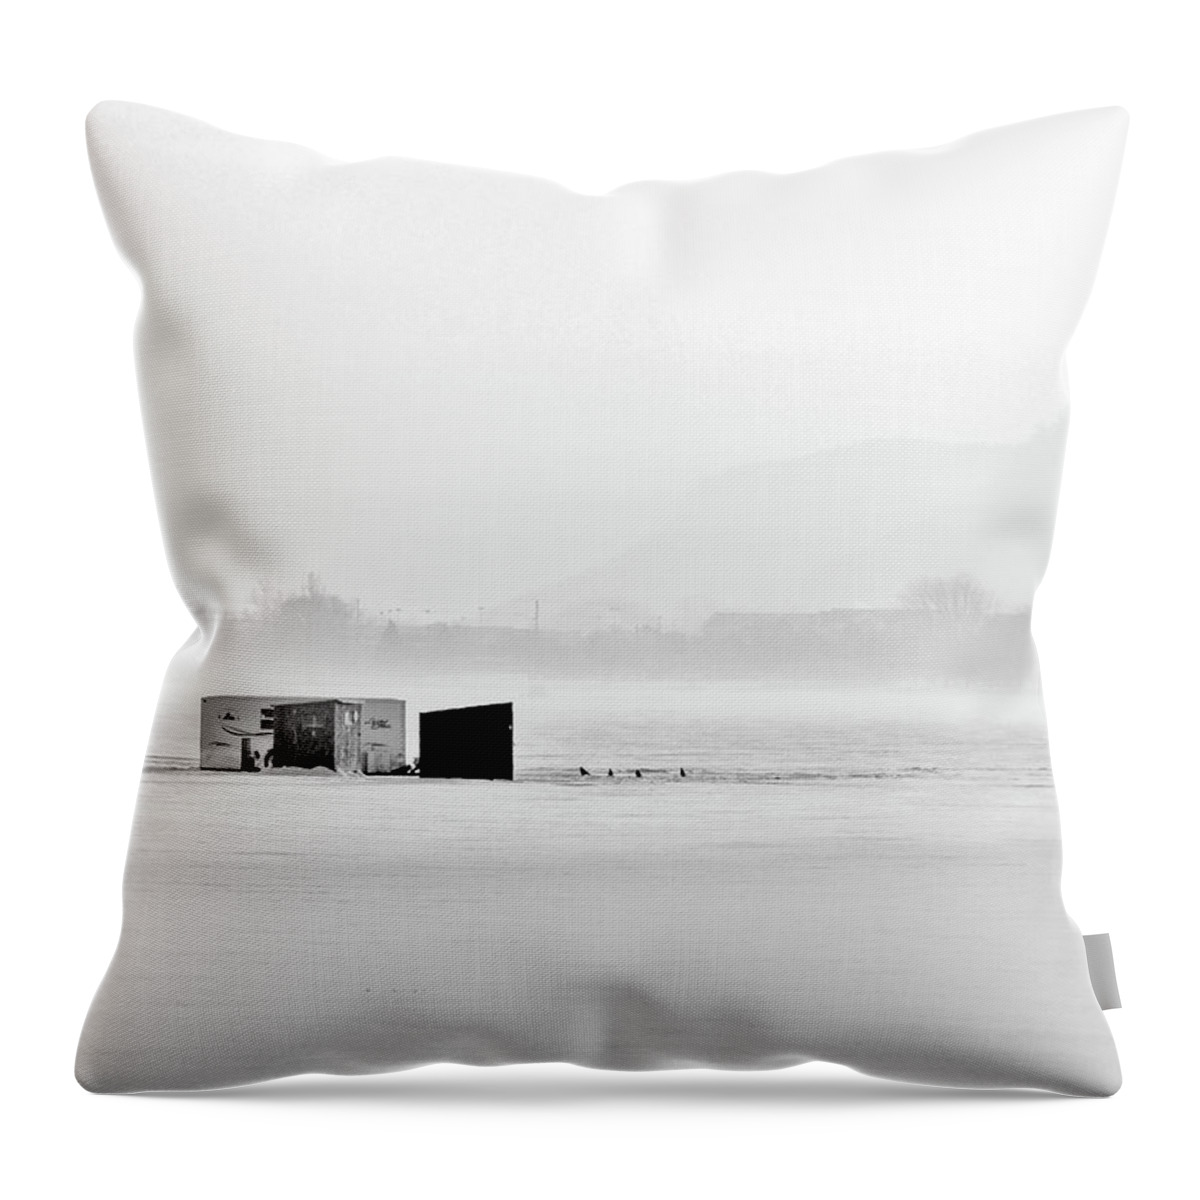 Ice Fishing Throw Pillow featuring the photograph Ice Fishing Food Chain by Susie Loechler